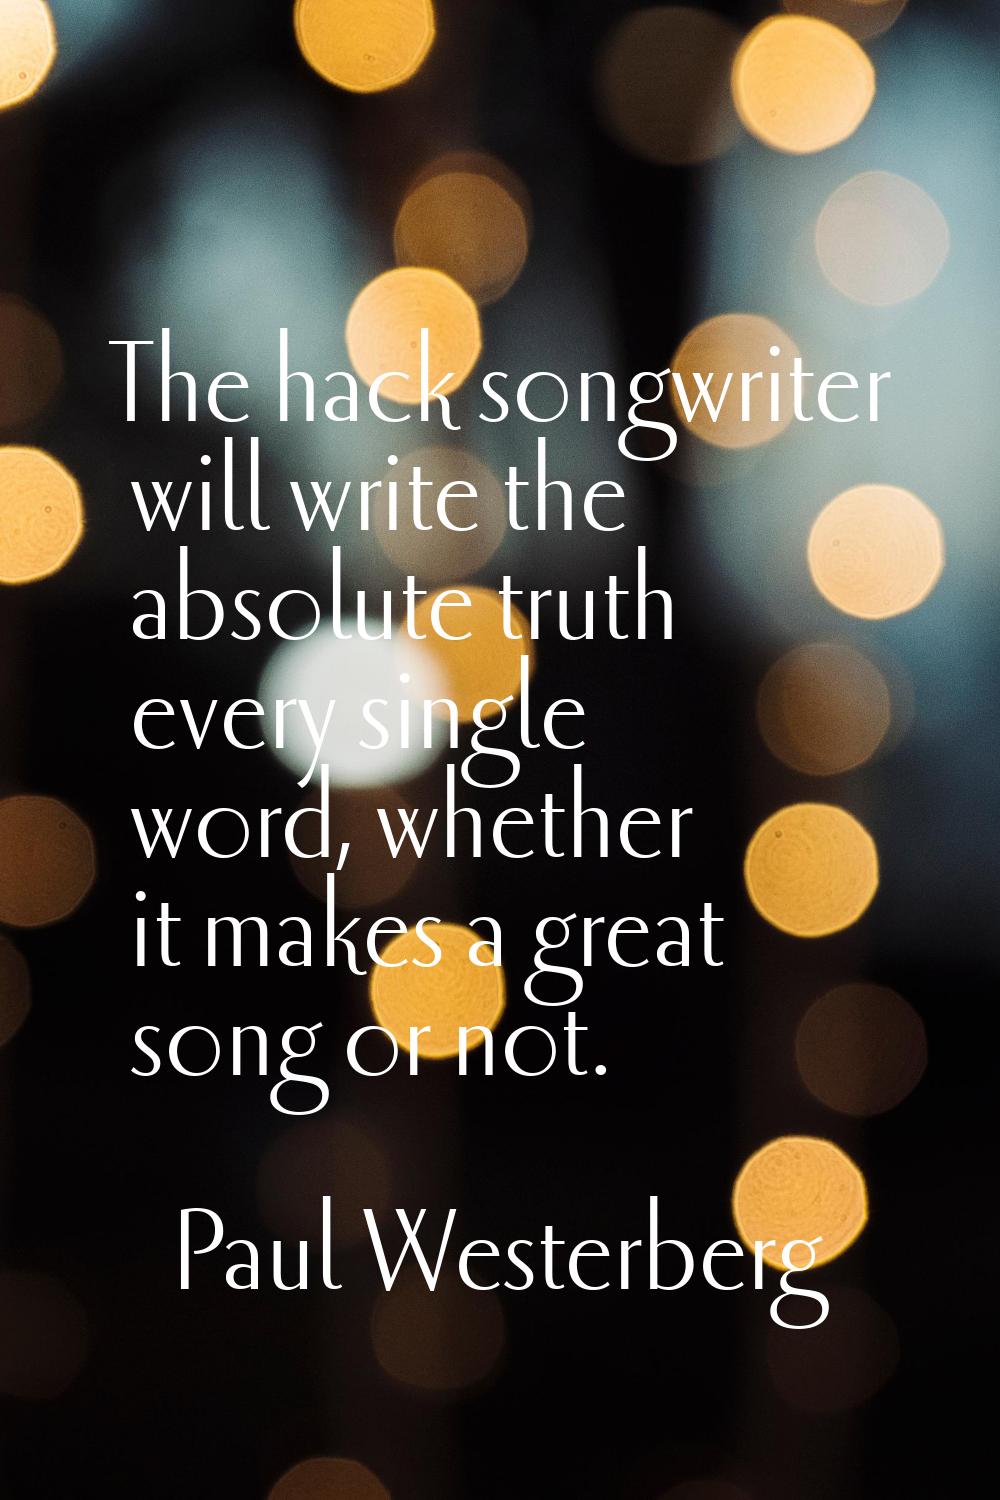 The hack songwriter will write the absolute truth every single word, whether it makes a great song 